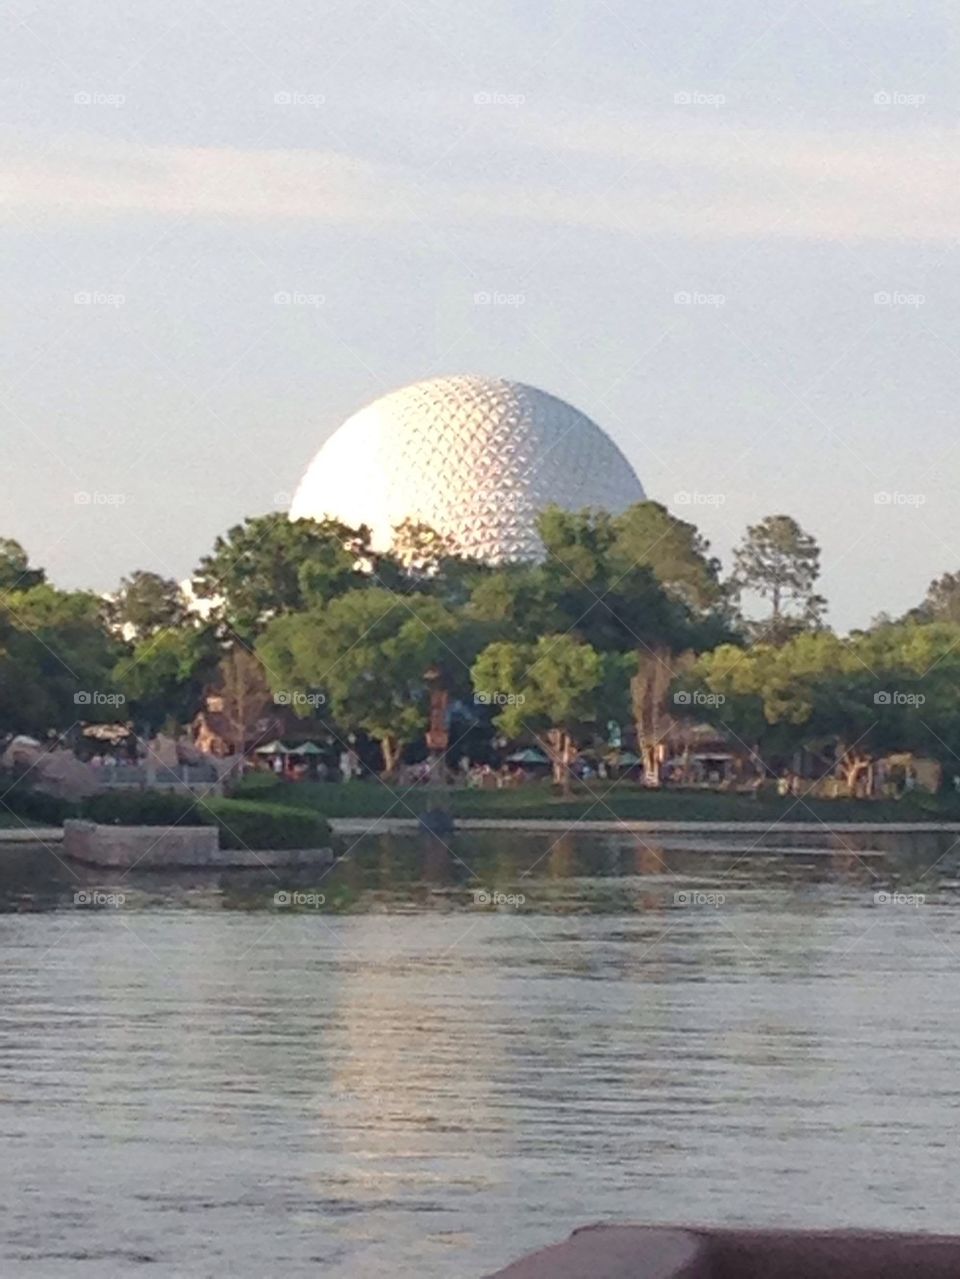 Epcot in the spring